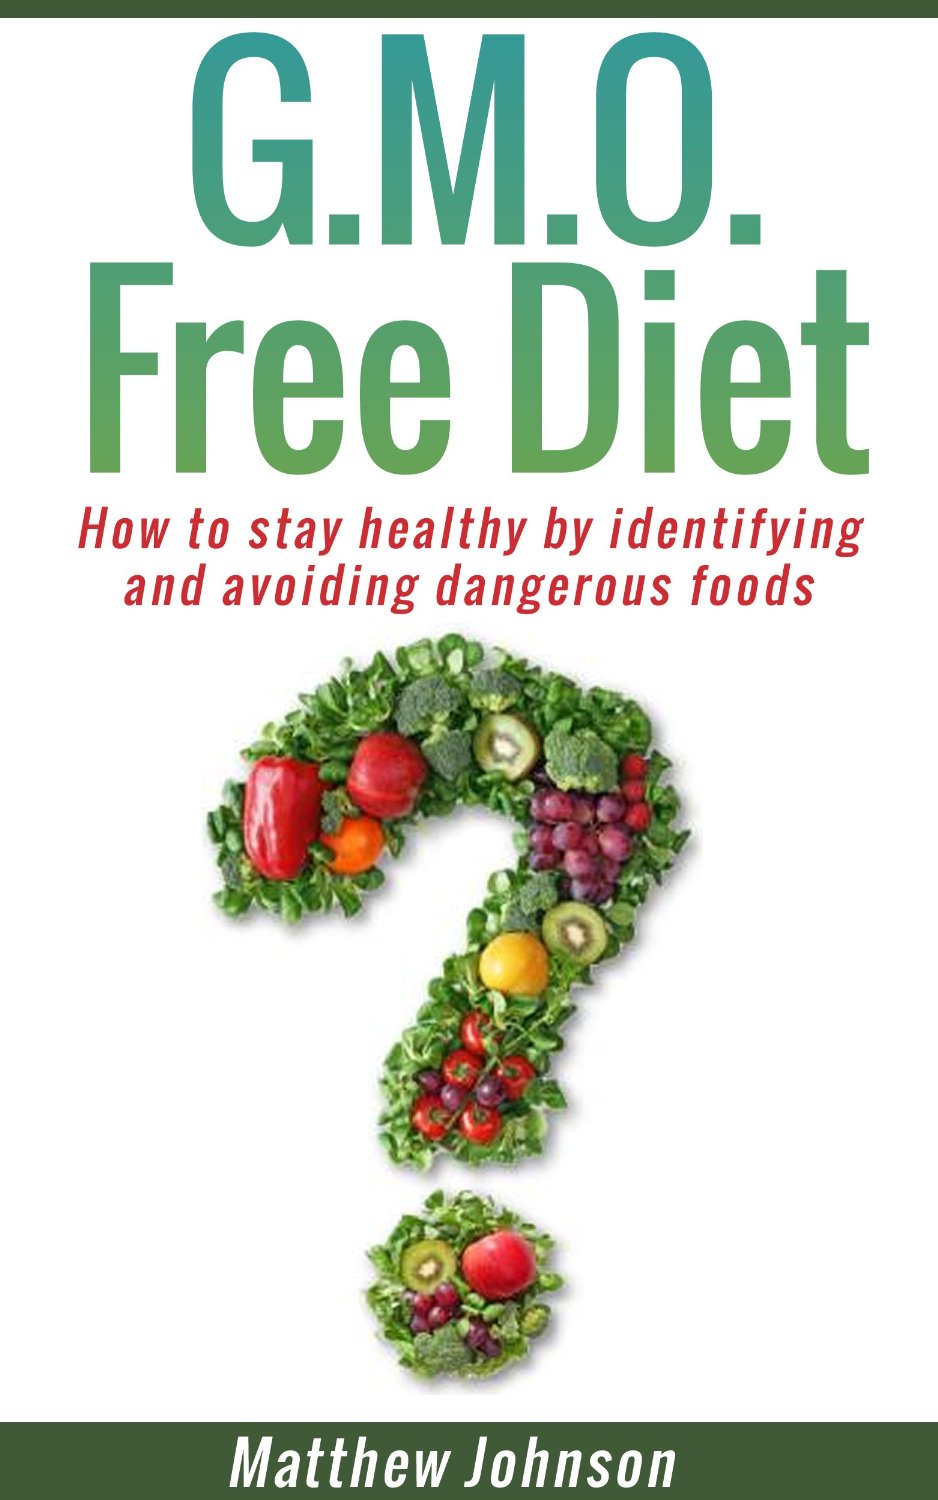 GMO Free Diet: How to stay healthy by identifying and avoiding dangerous foods by Matthew Johnson